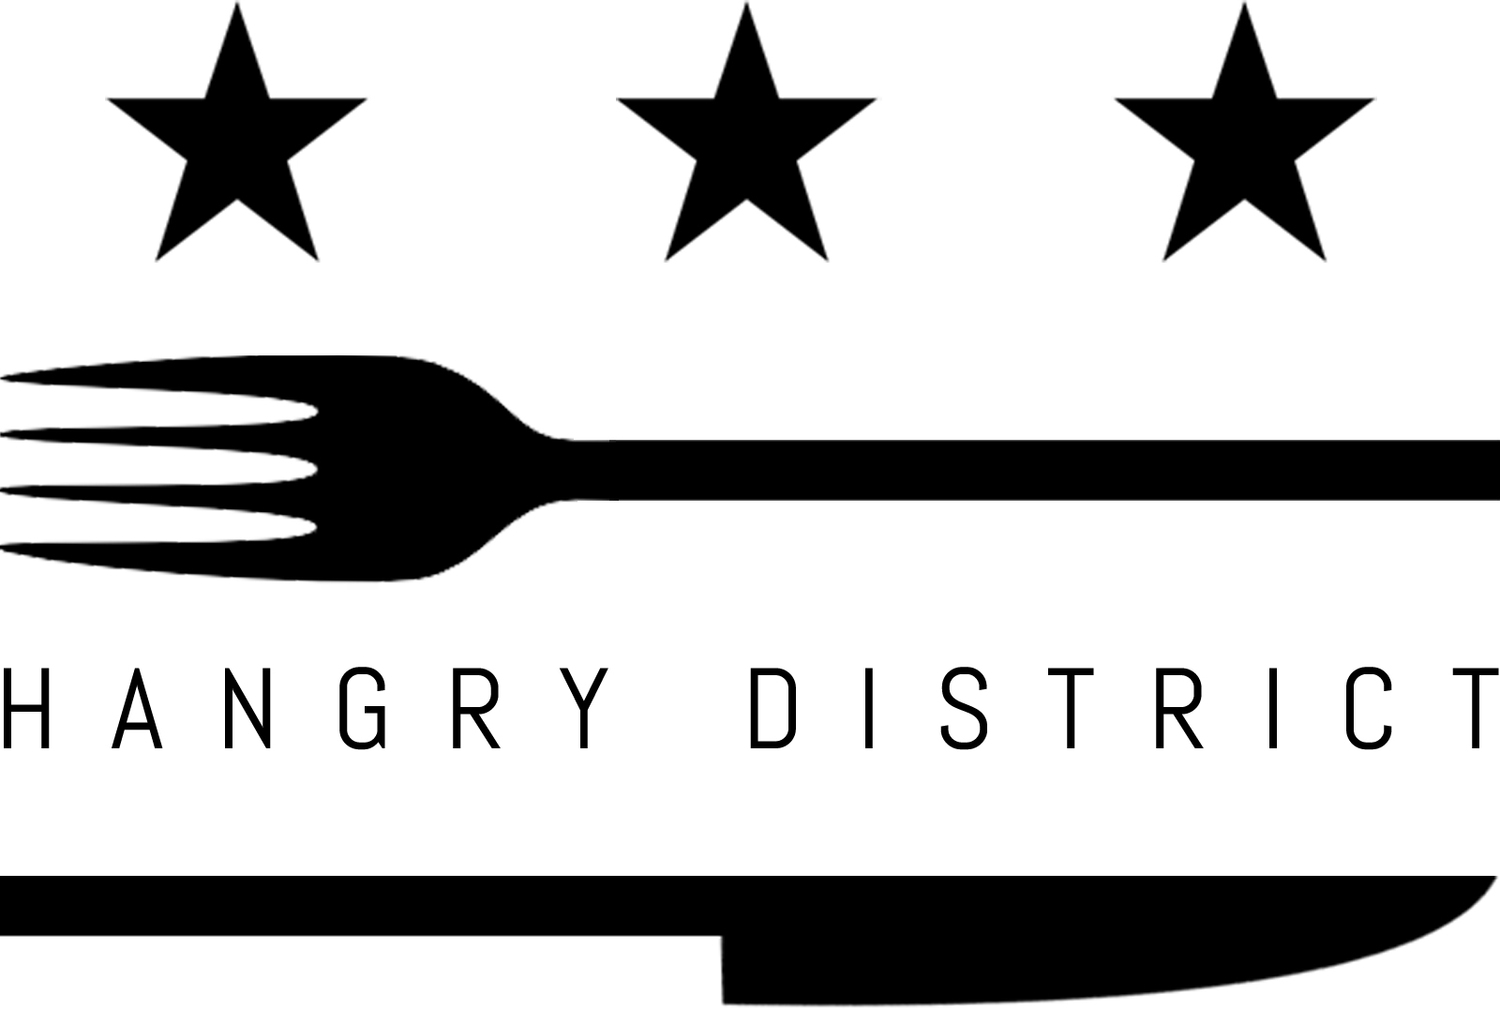 Hangry District